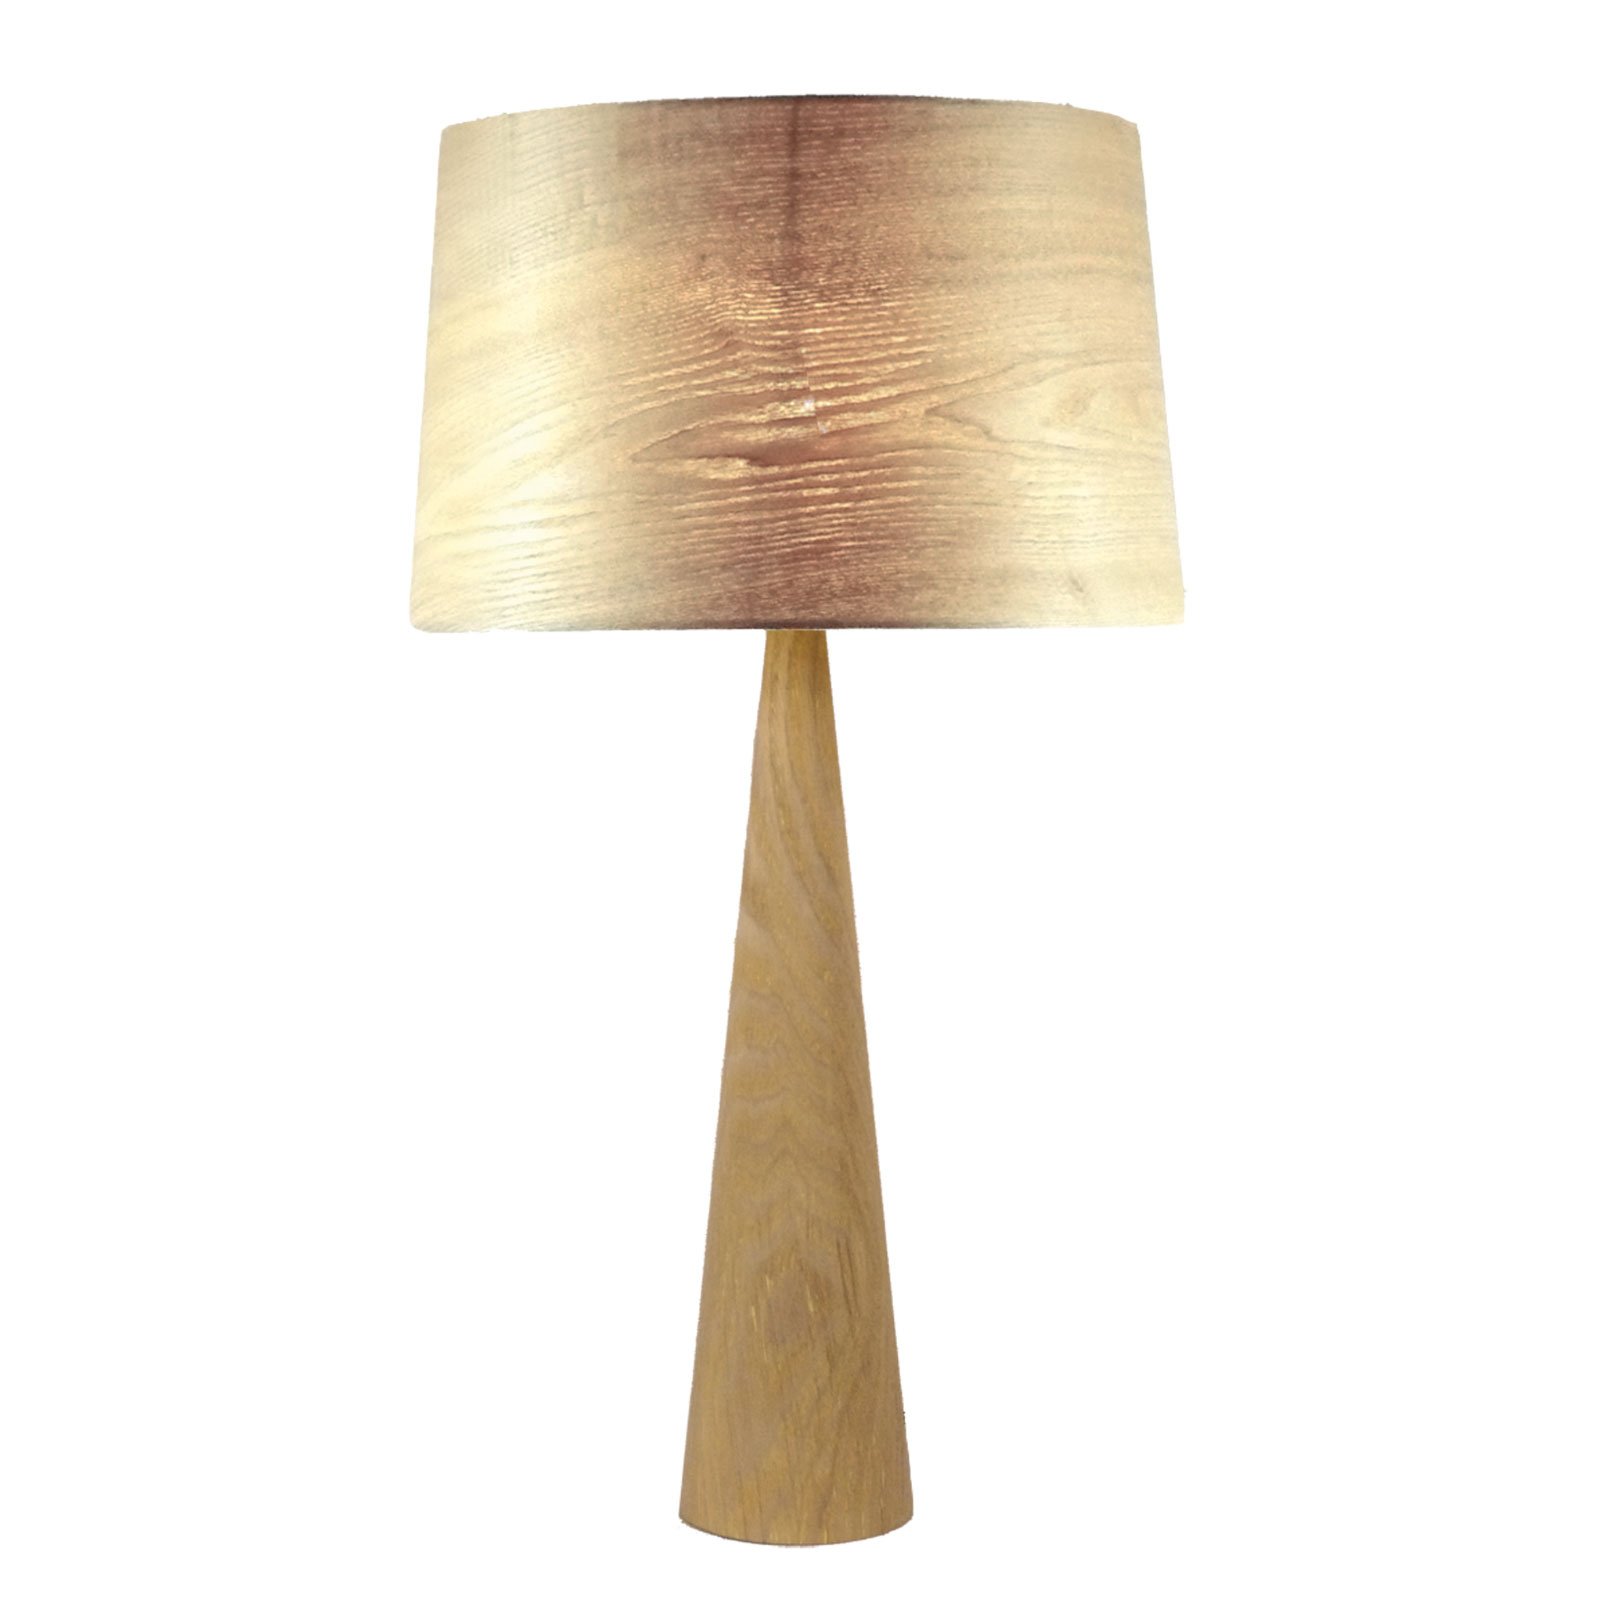 Totem LT table lamp in a natural wood look